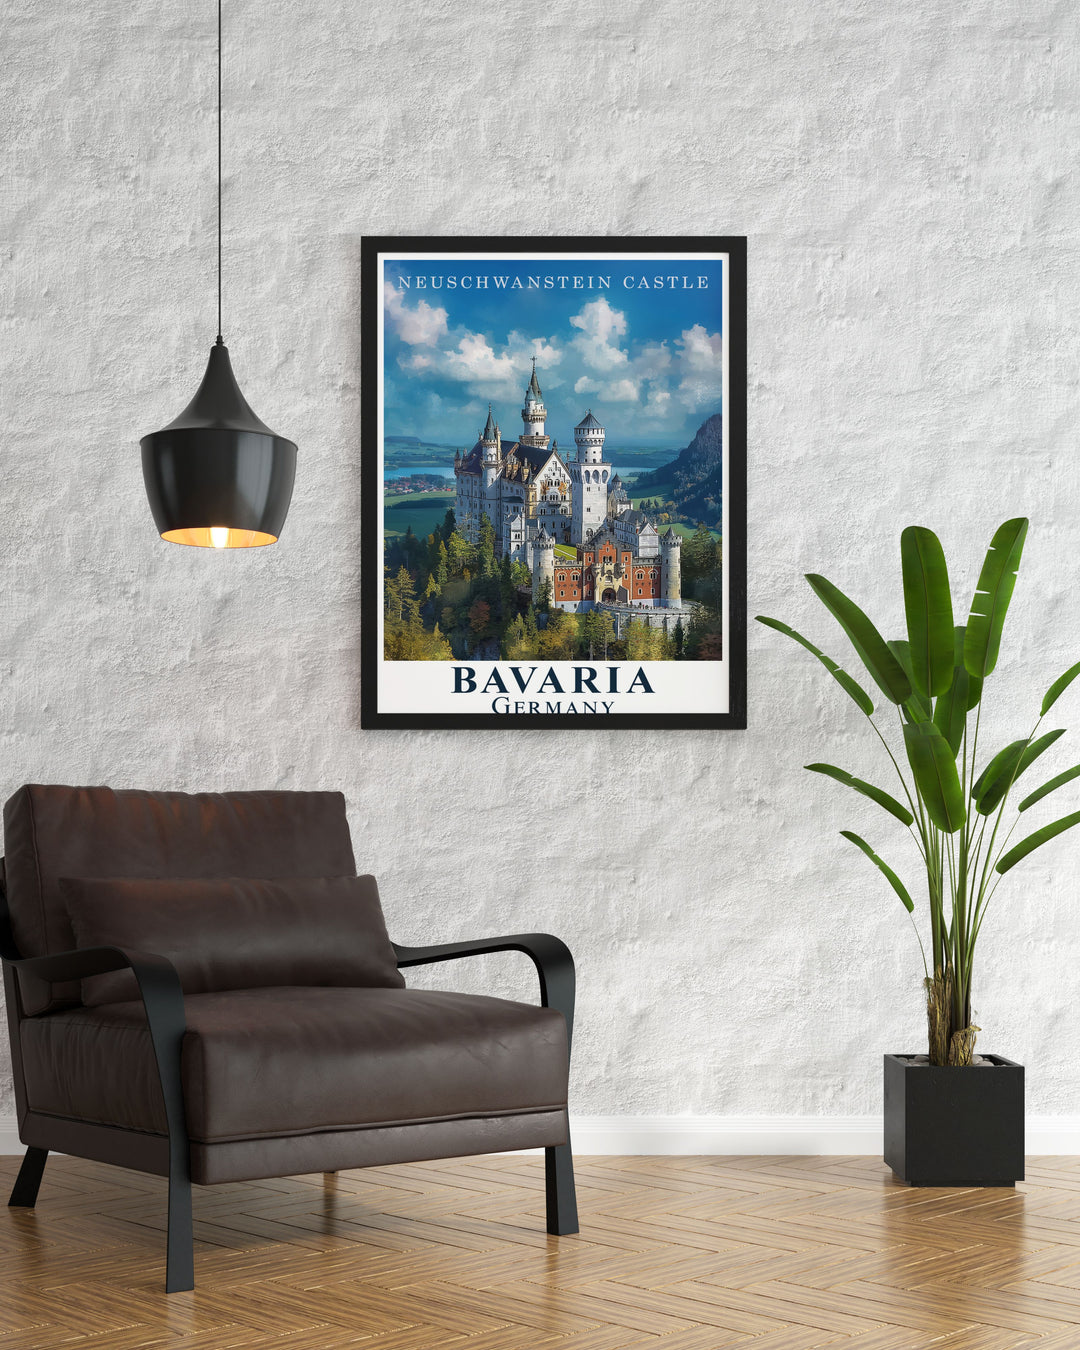 Neuschwanstein Castle prints perfect for those who appreciate architectural marvels and fine art. This black and white design adds timeless elegance to your home decor collection.